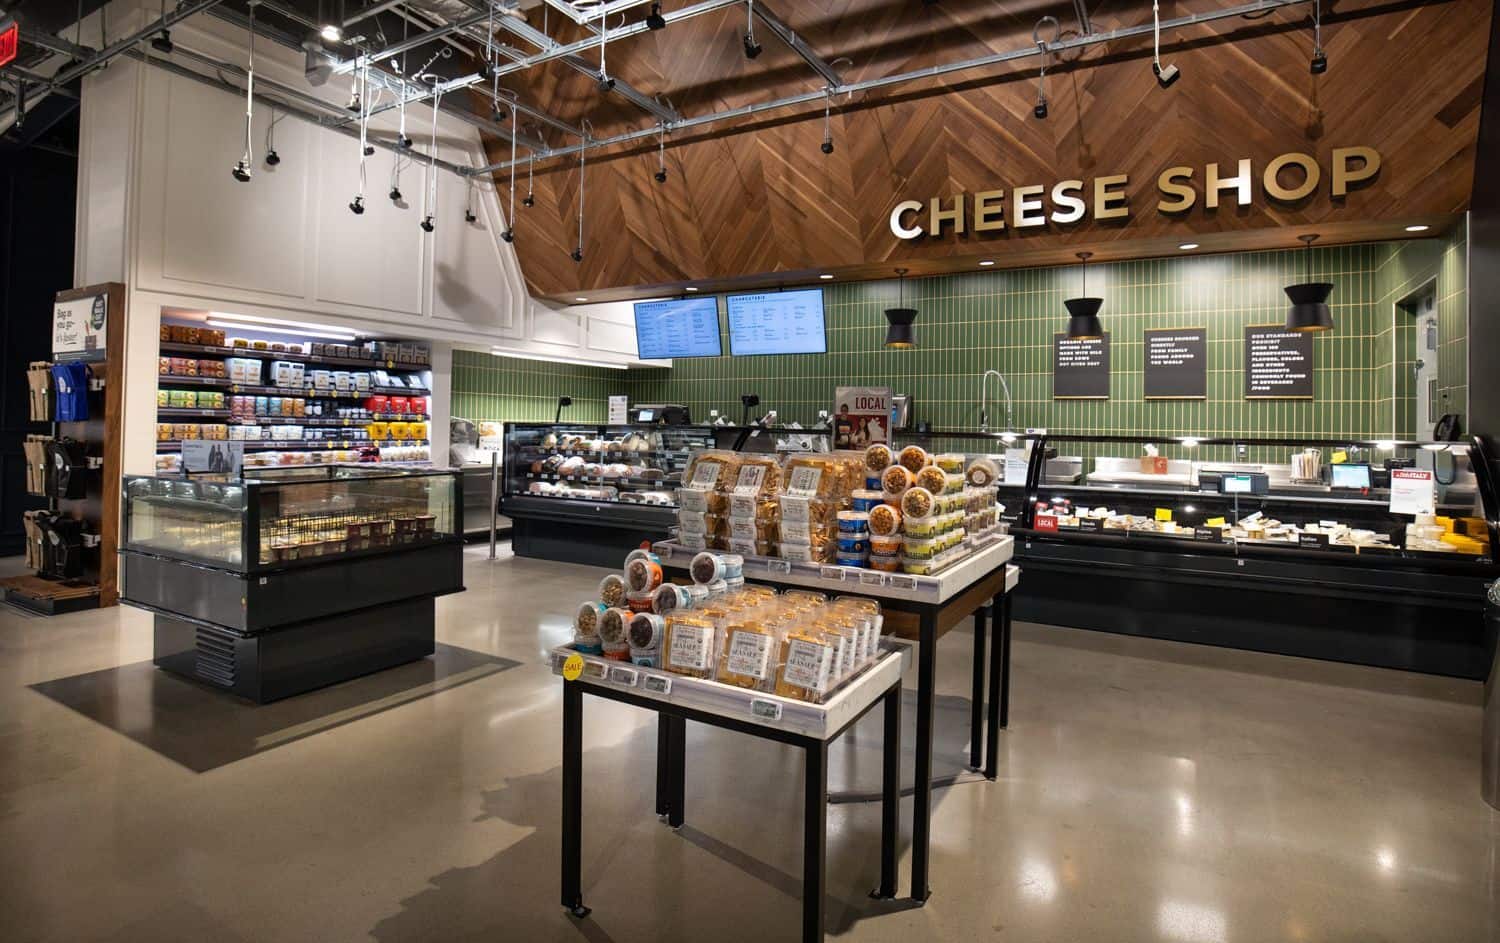 Whole Foods Market launches Just Walk Out shopping in two stores